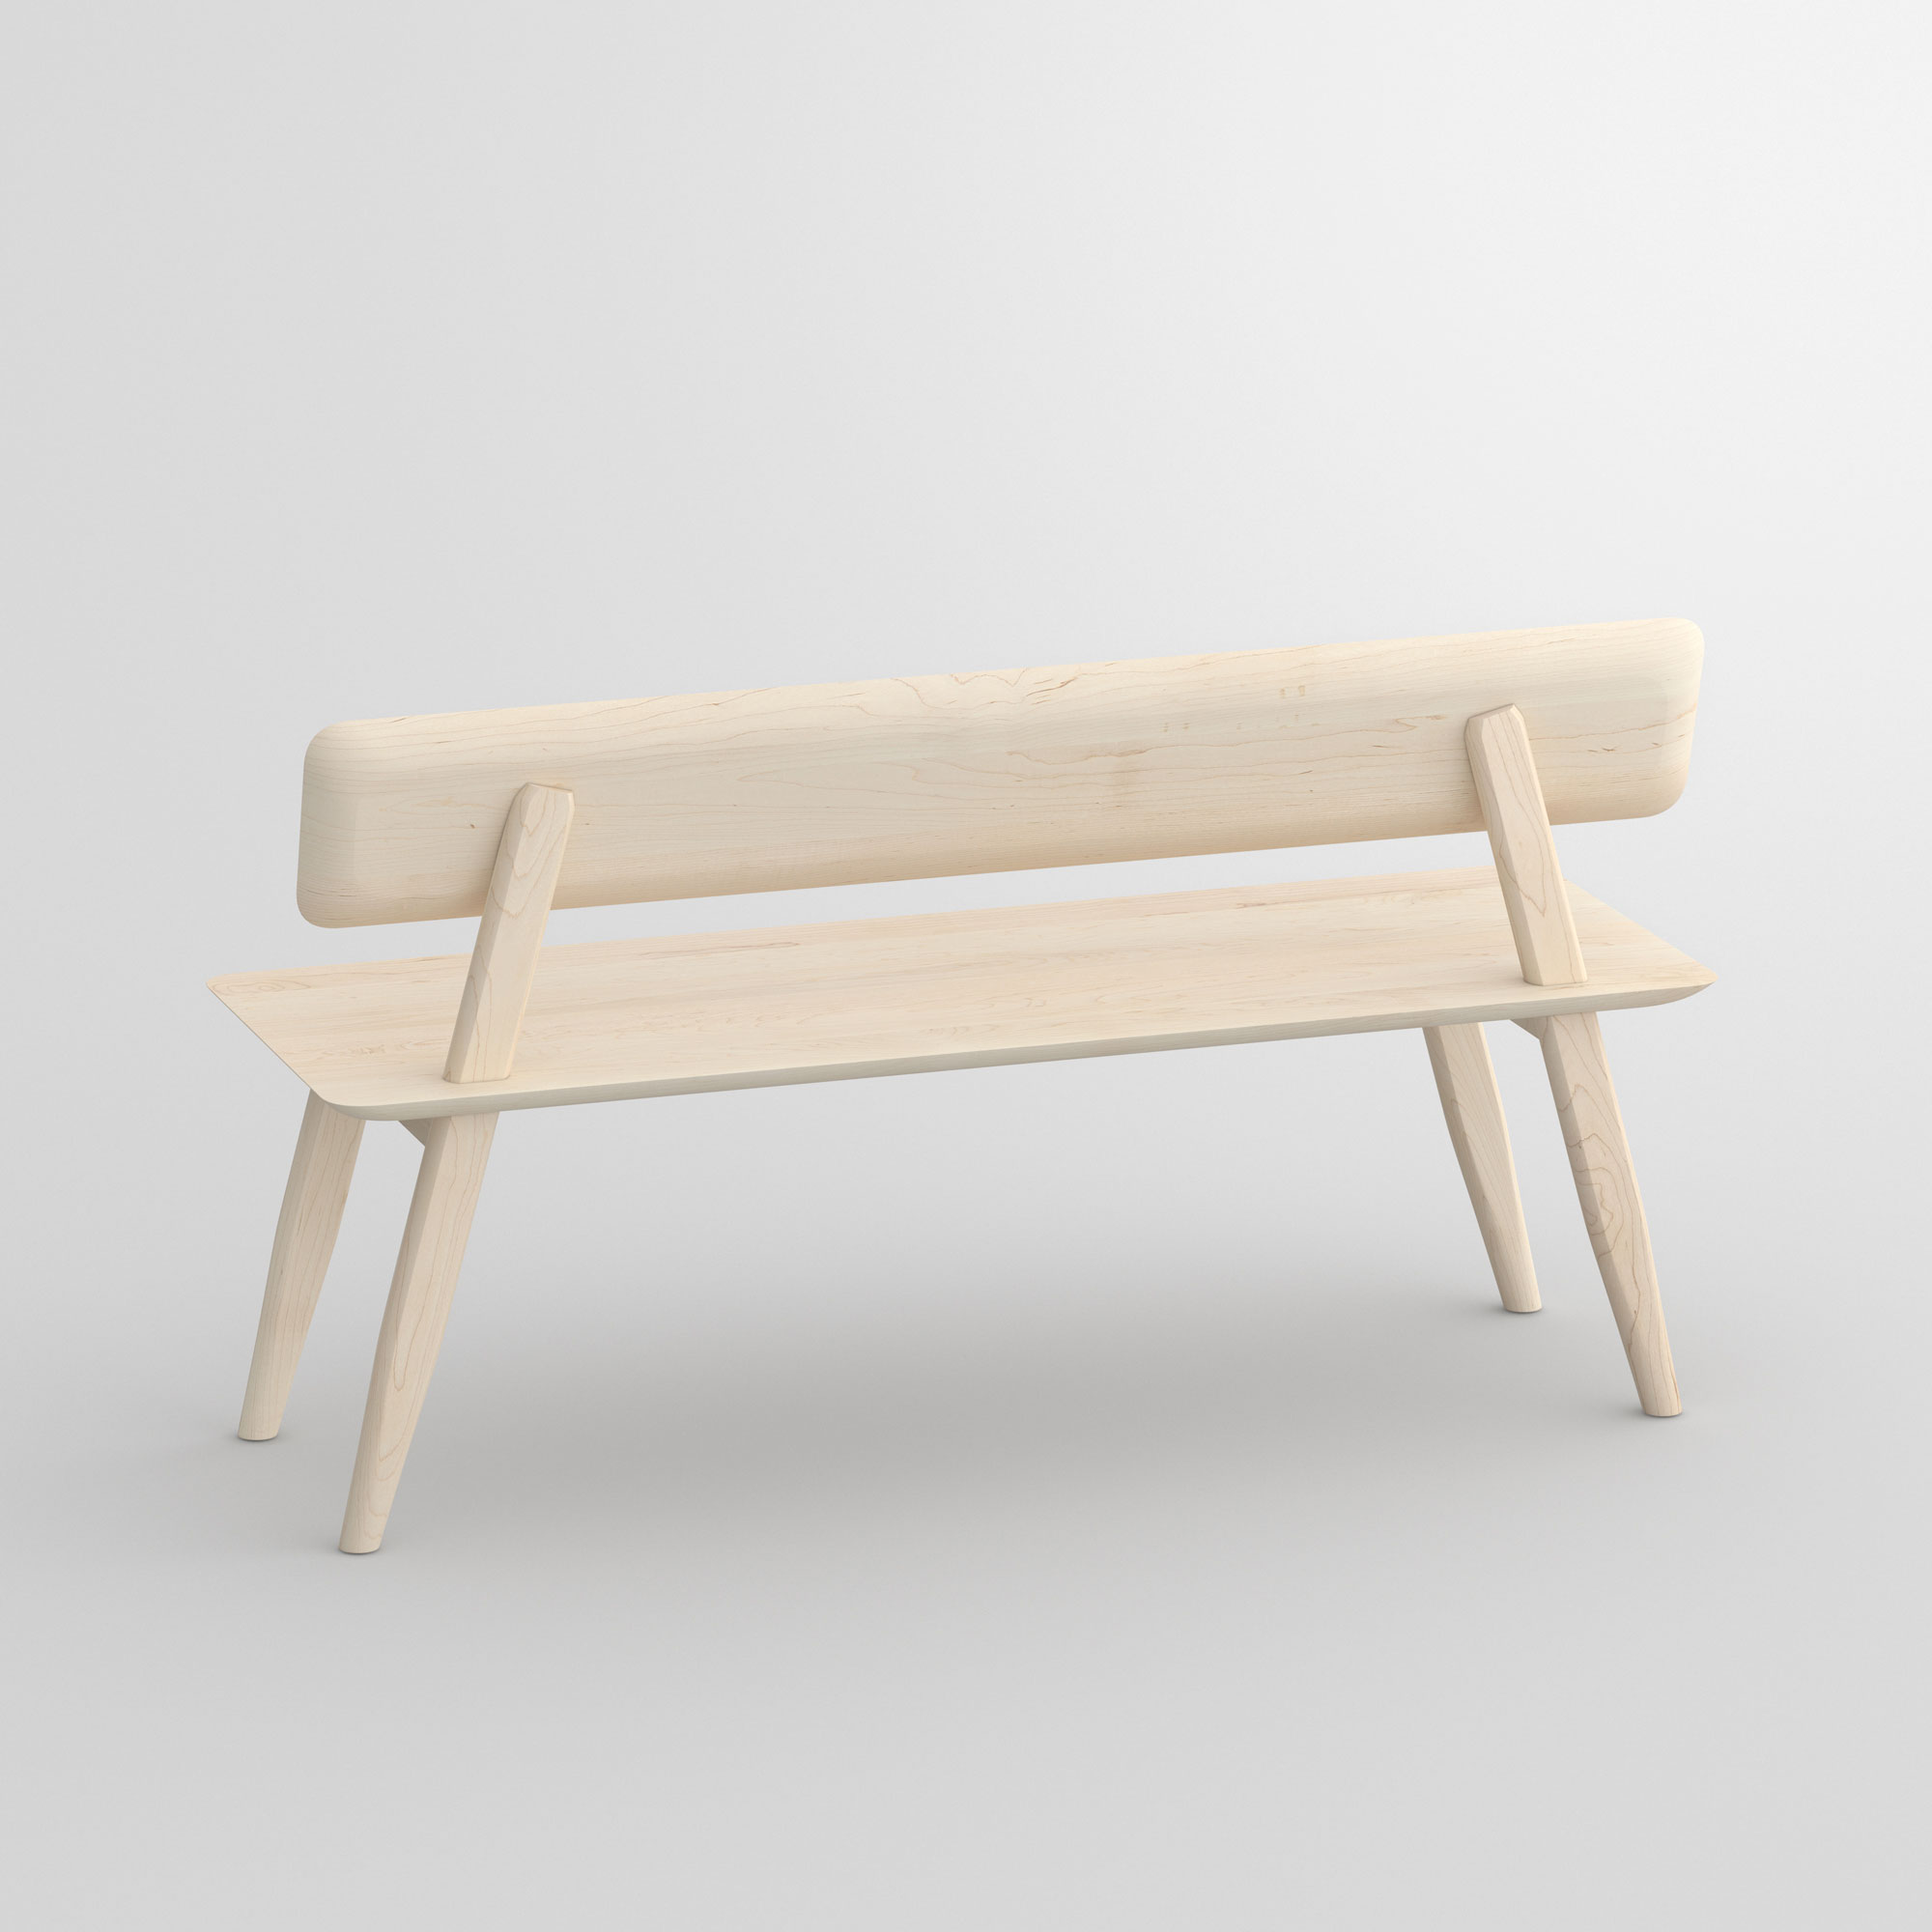 Bench with Back AETAS RL cam1 custom made in solid wood by vitamin design